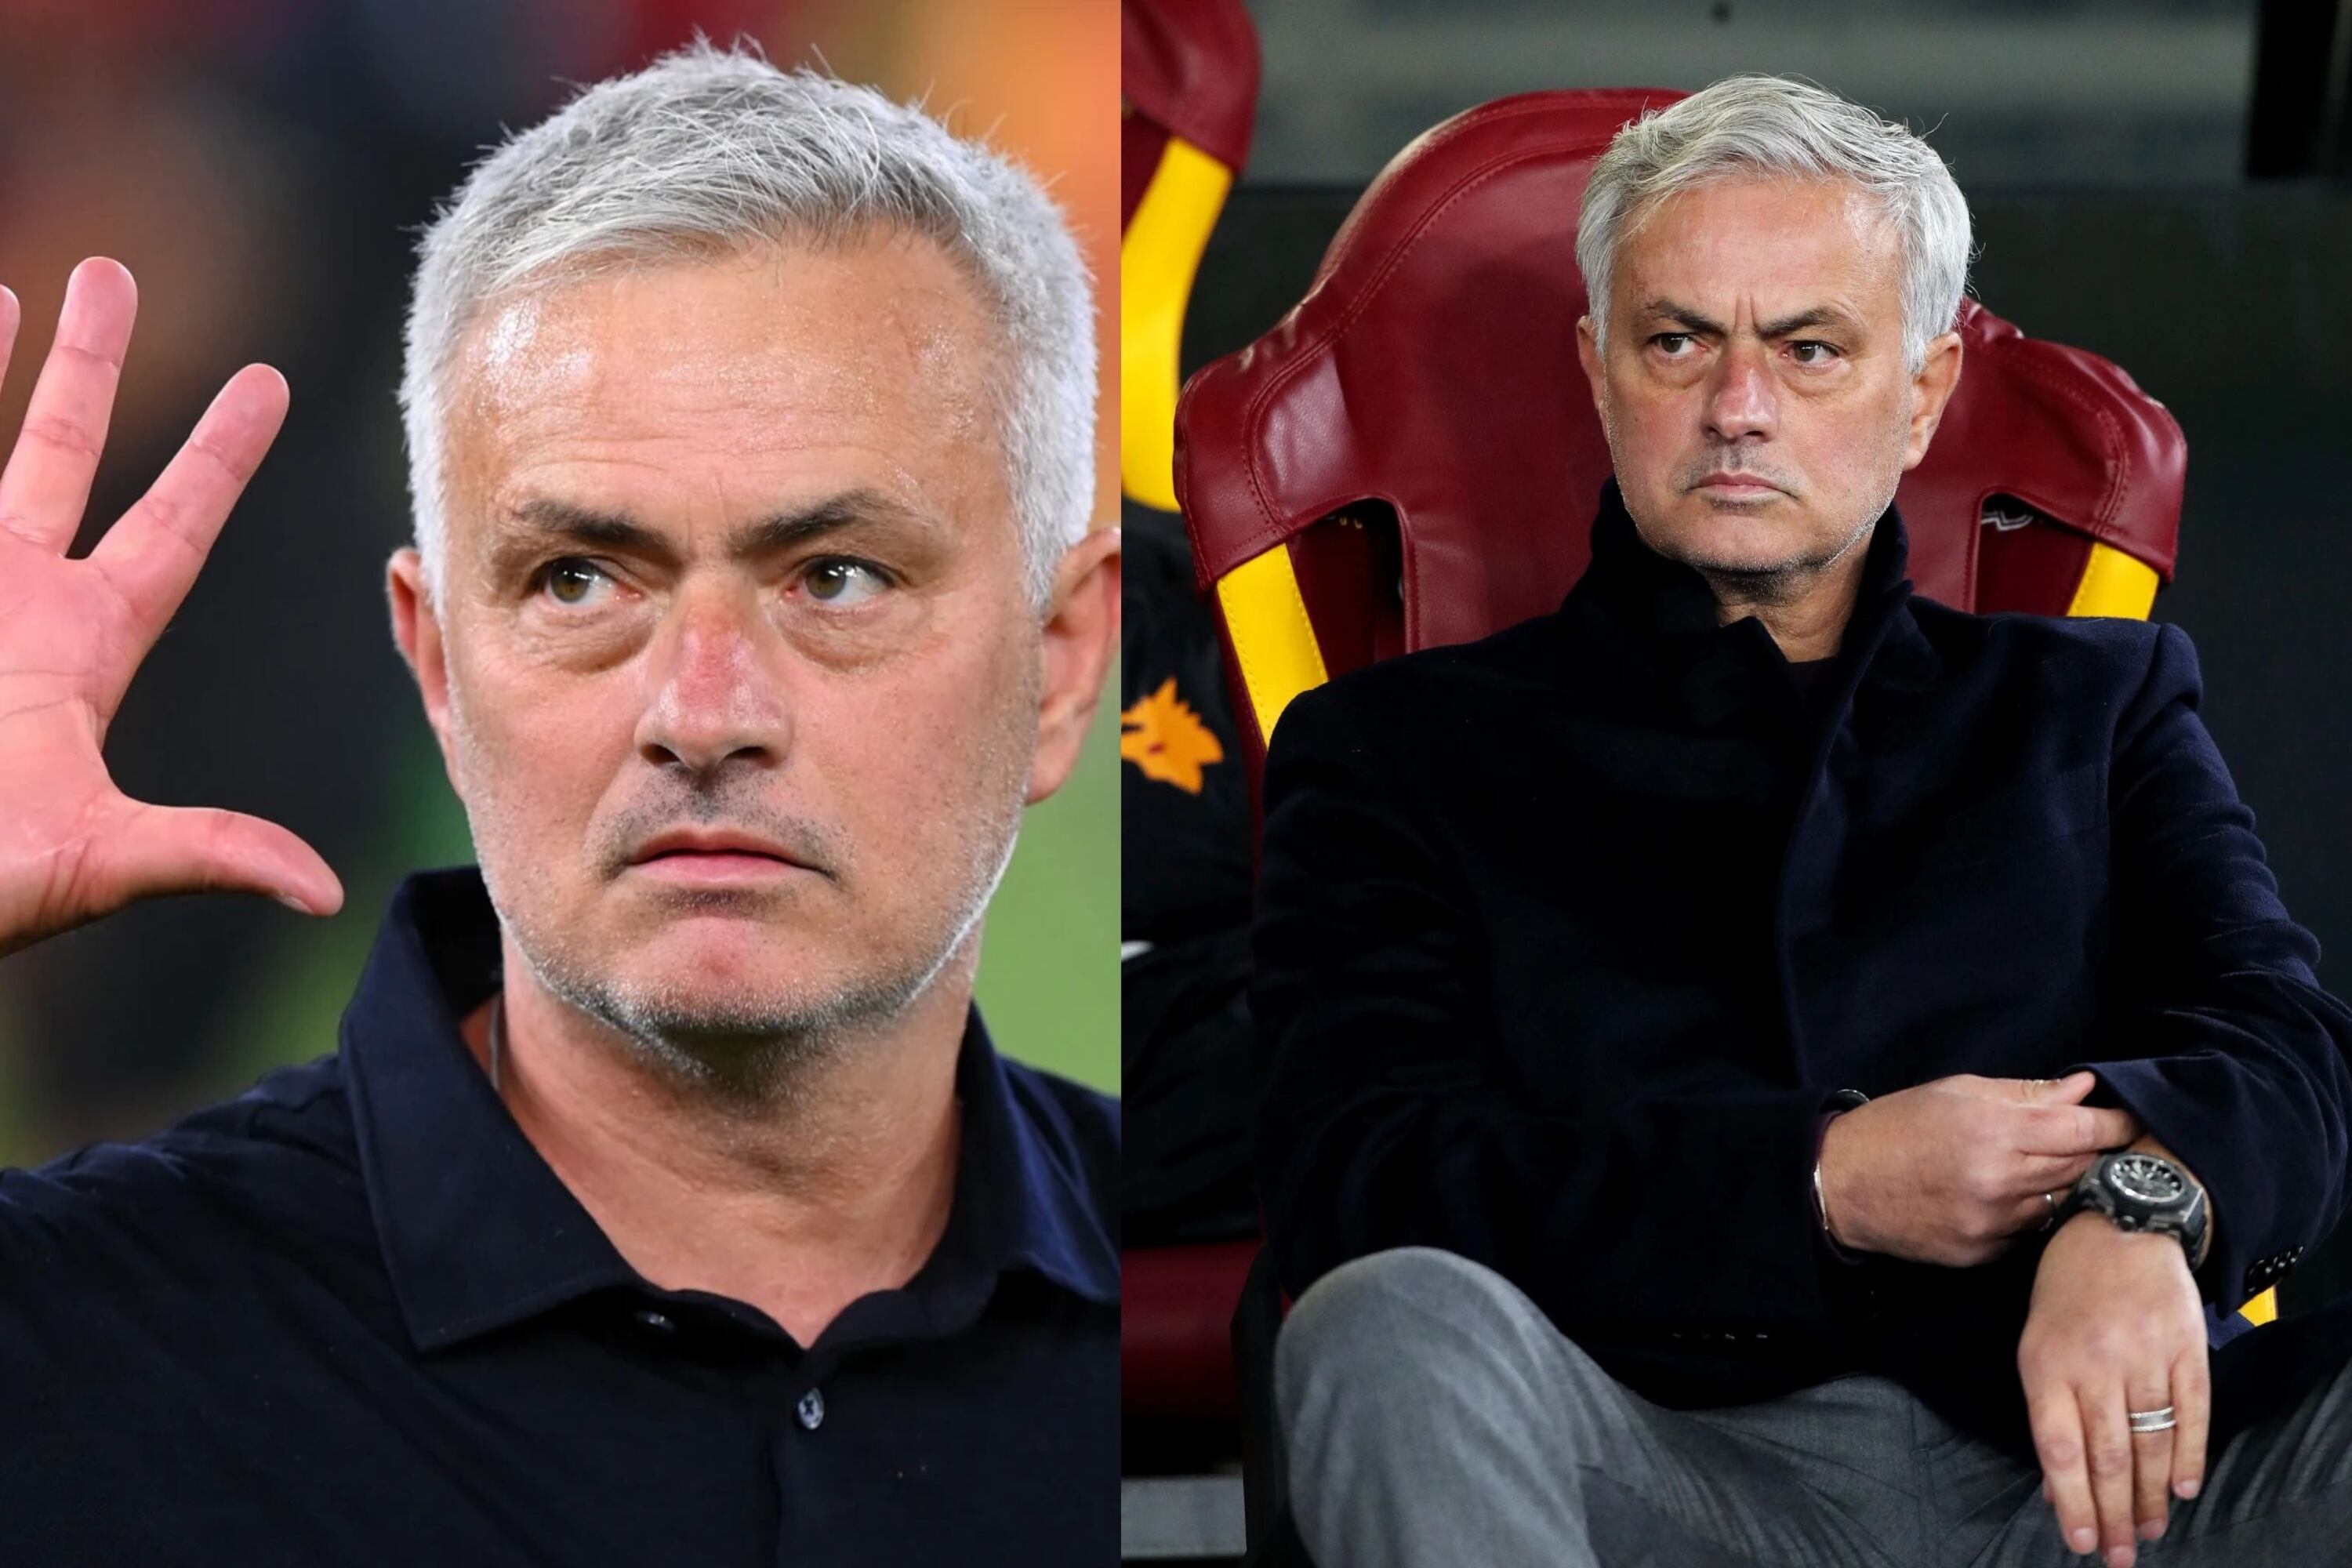 After the Premier League offer, Mourinho's response that shock the fans